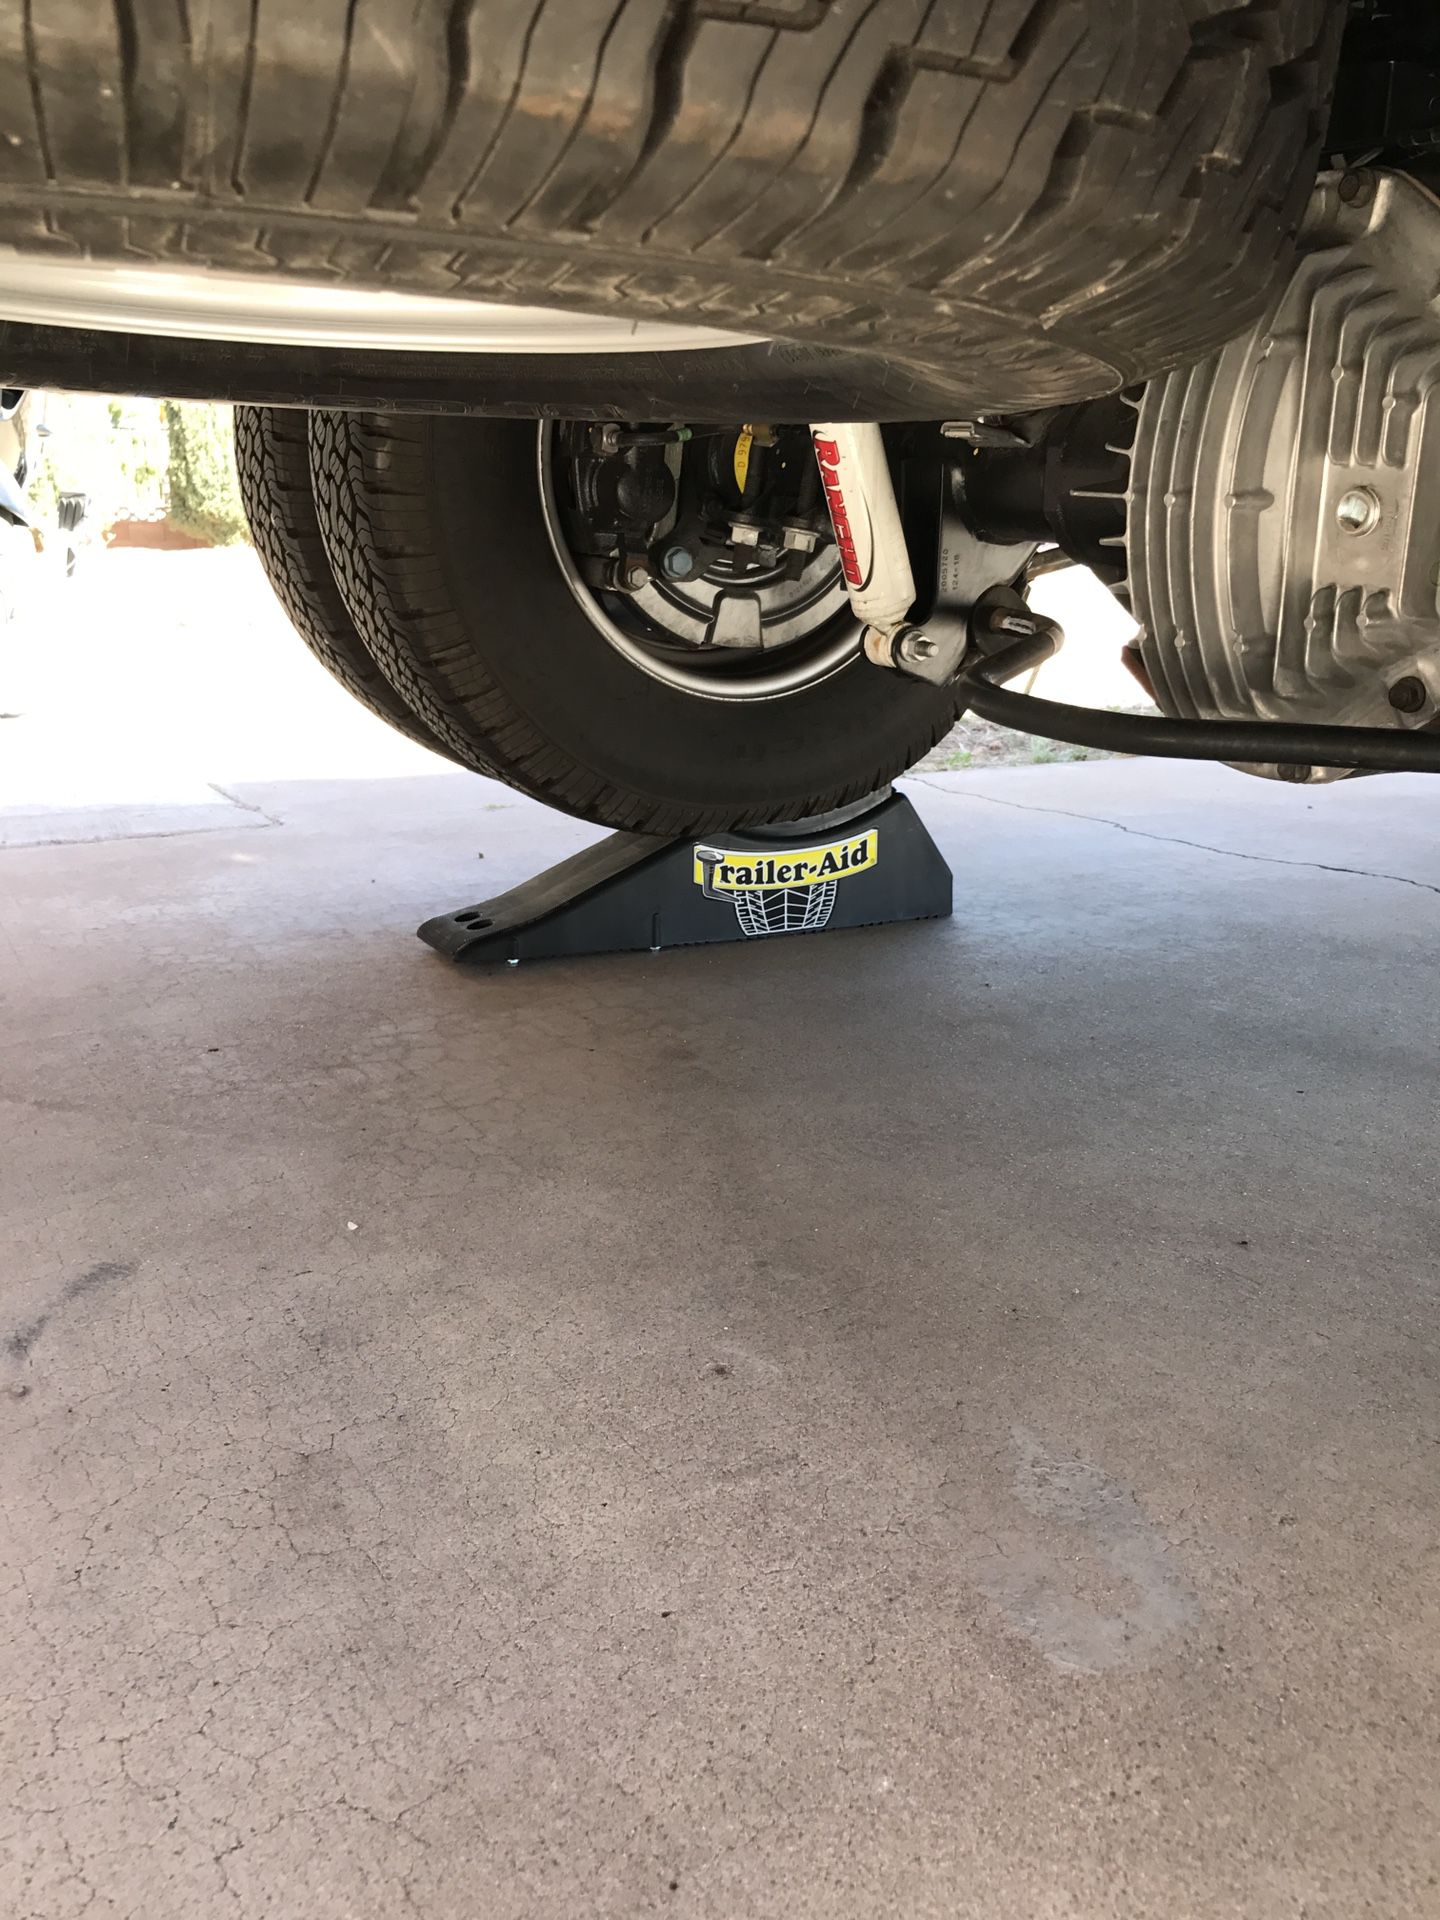 MAKE A REASONABLE OFFER! New! Trailer Aid Plus Tire Change Ramp